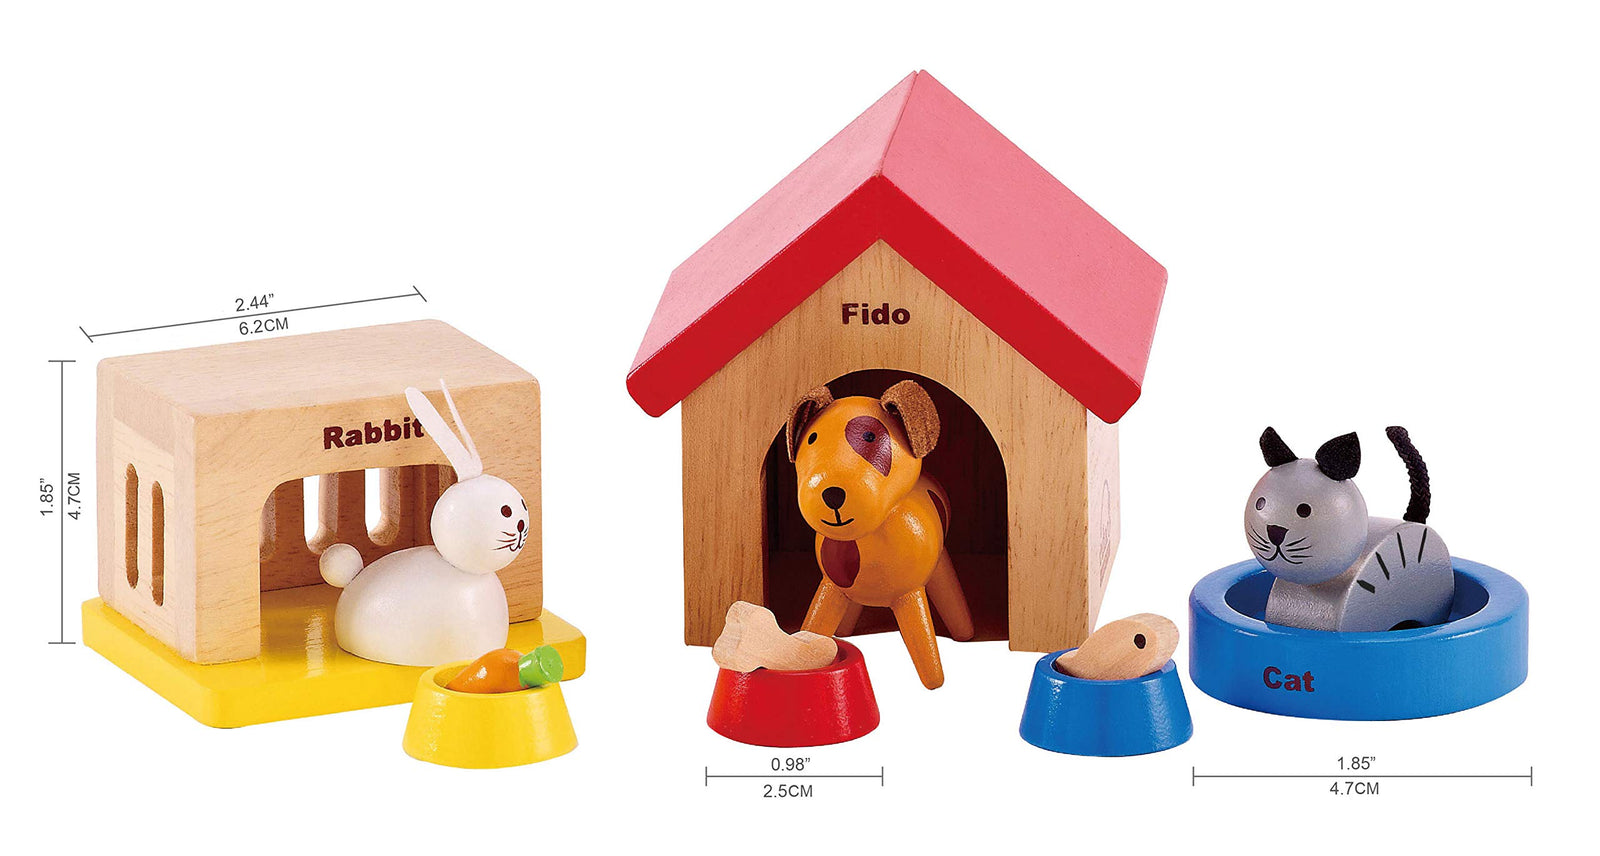 Family Pets Wooden Dollhouse Animal Set by Hape | Complete Your Wooden Dolls House with Happy Dog, Cat, Bunny Pet Set with Complimentary Houses and Food Bowls